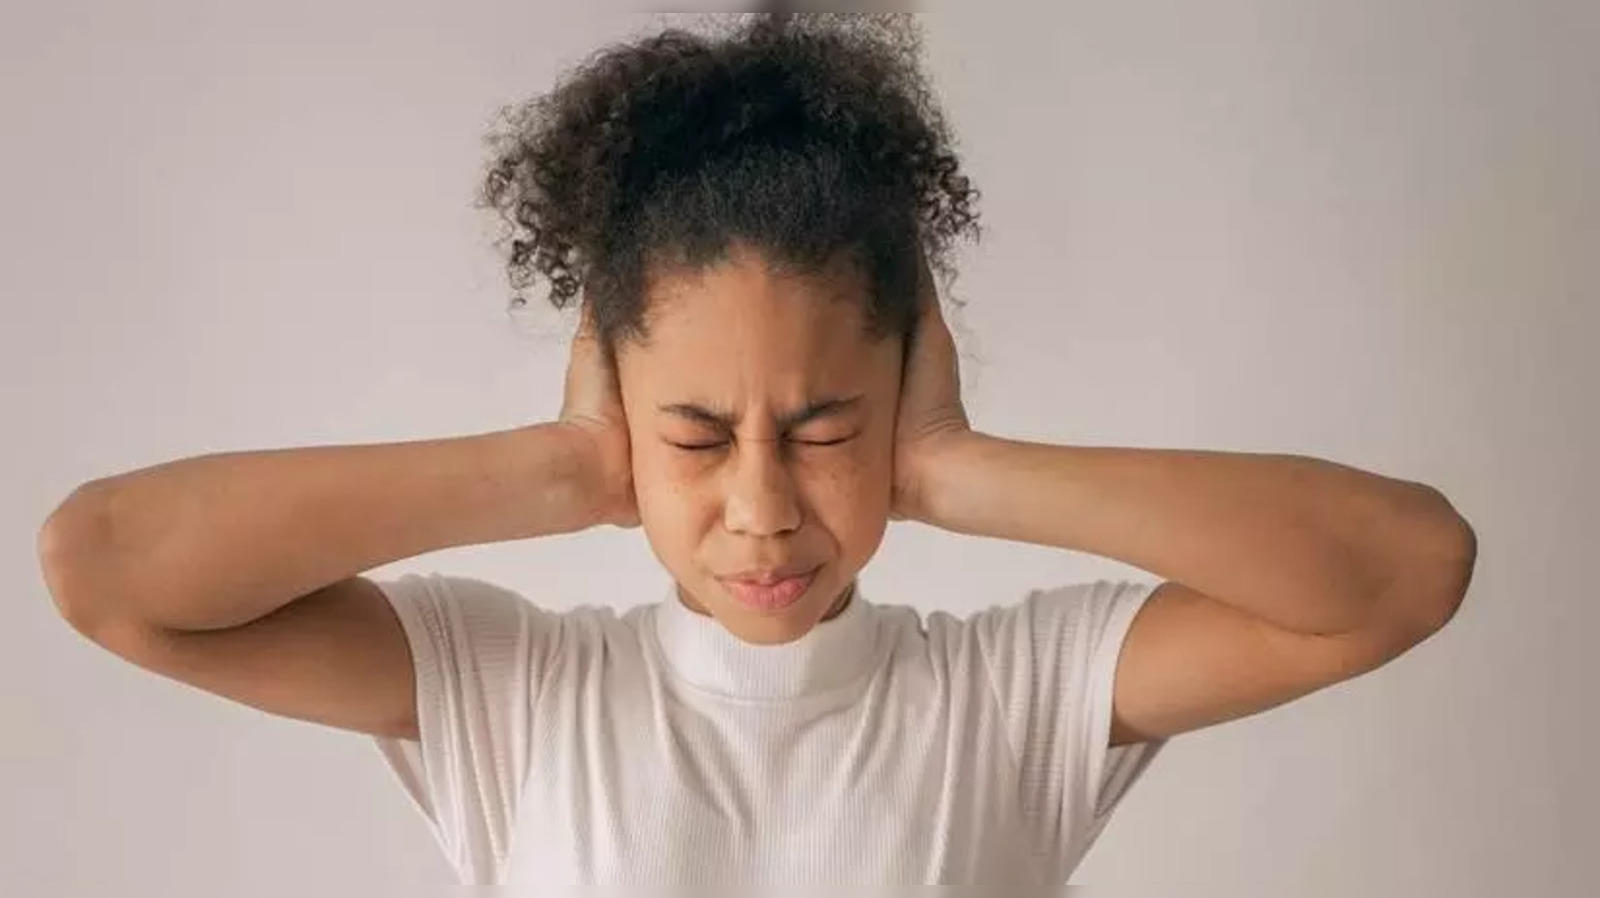 Are Your Ears Ringing? 10 Ways to Manage Tinnitus - CNET